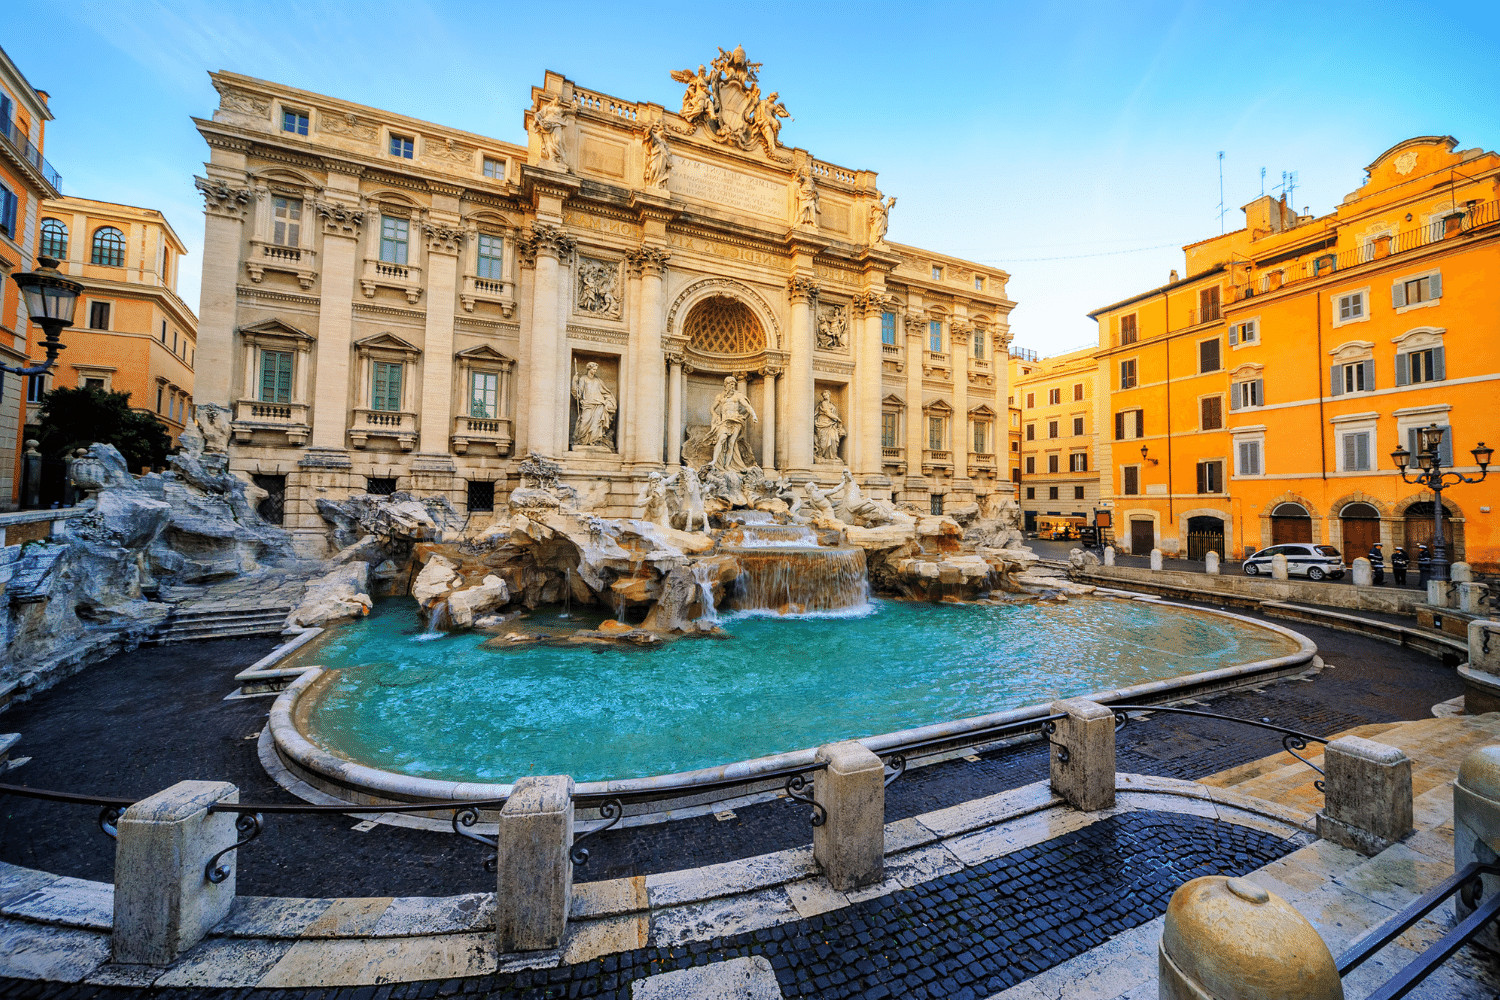 Why is the Trevi Fountain so famous? Local Guides World